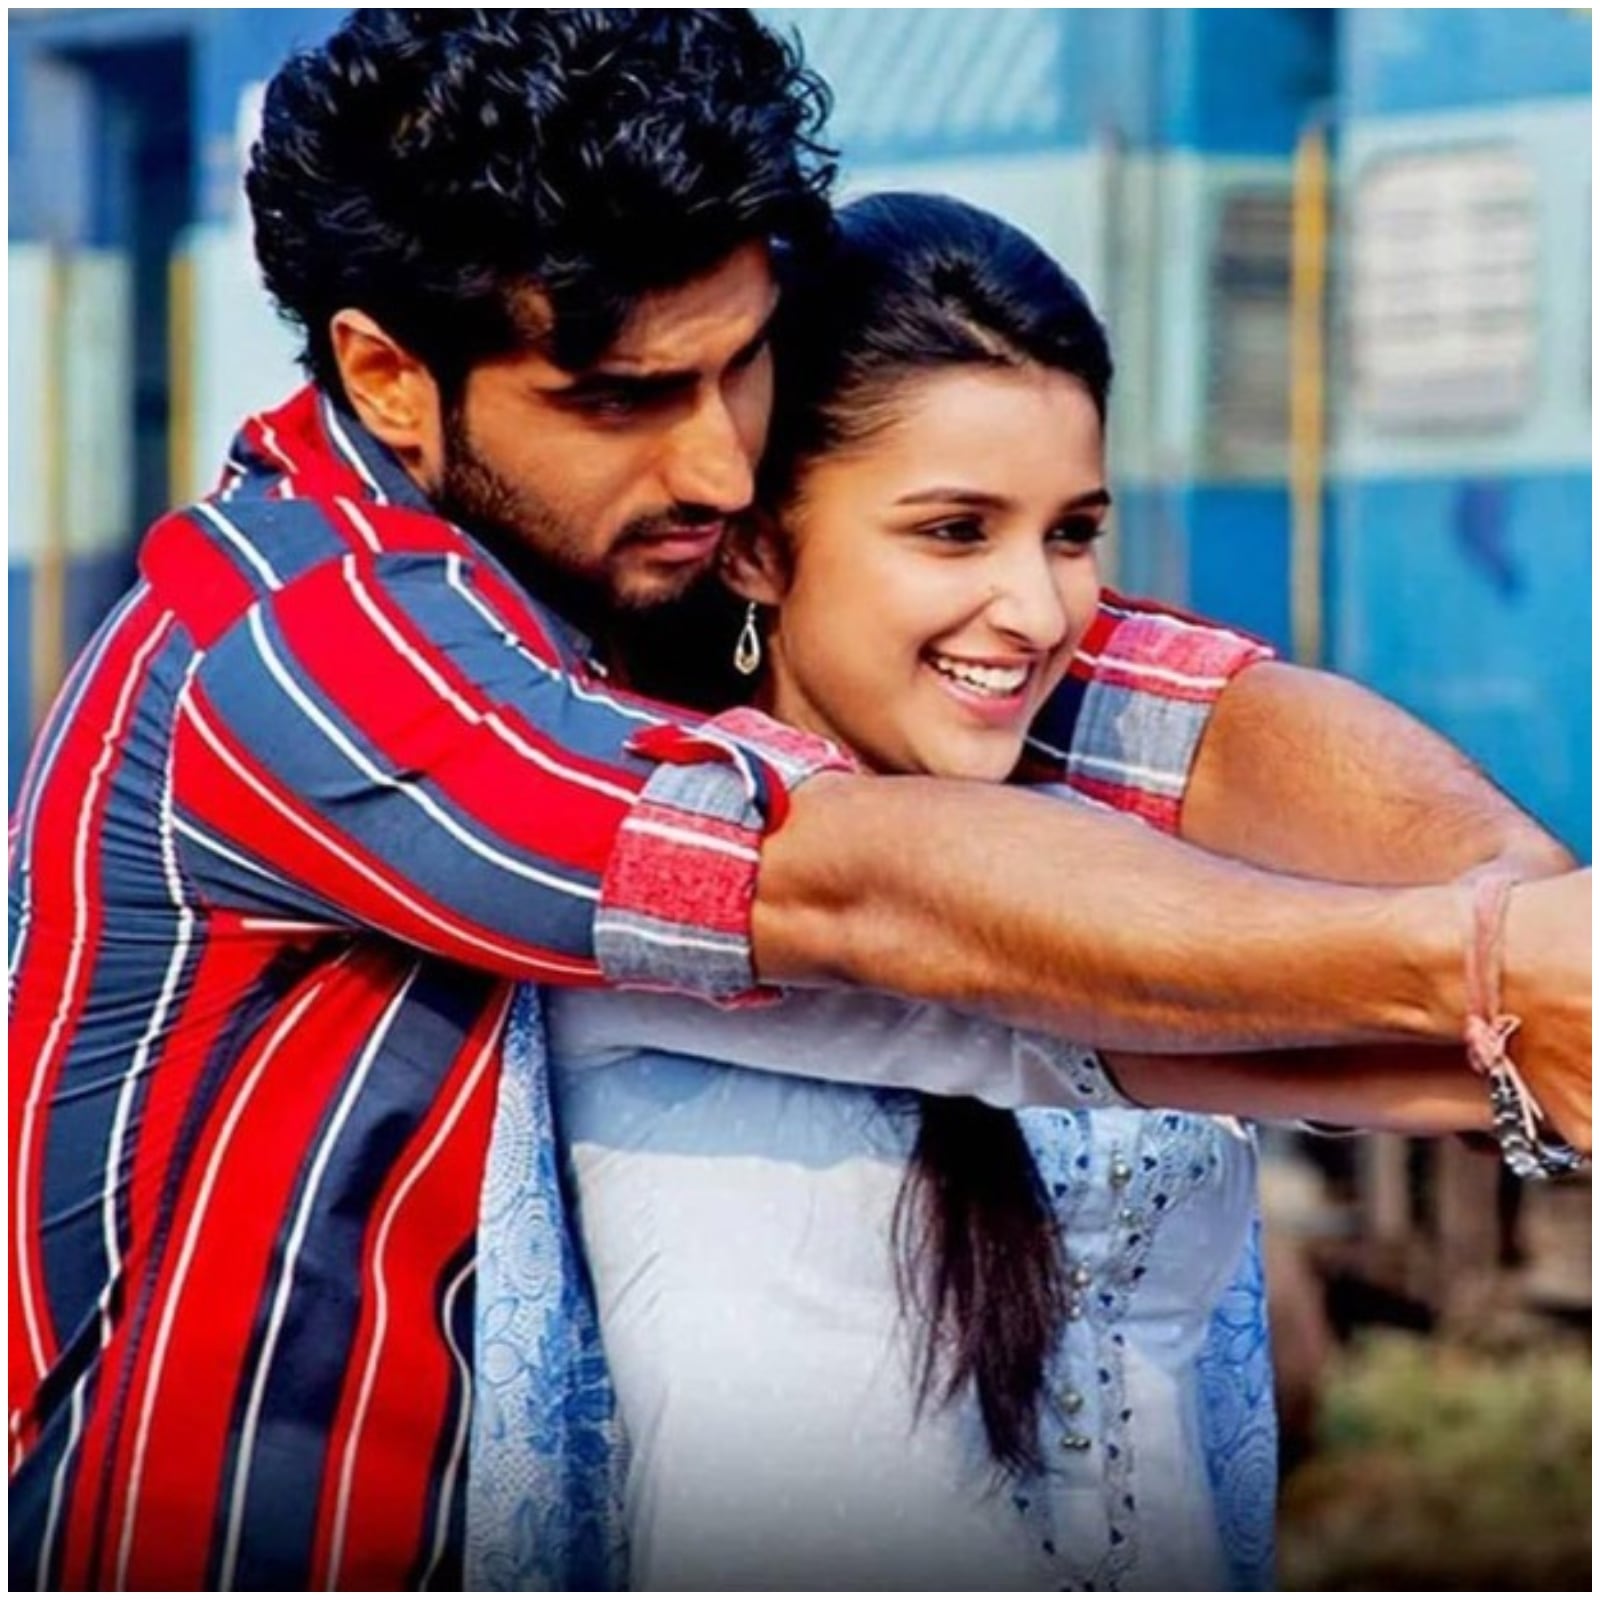 Ishaqzaade - Film Cast, Release Date, Ishaqzaade Full Movie Download,  Online MP3 Songs, HD Trailer | Bollywood Life